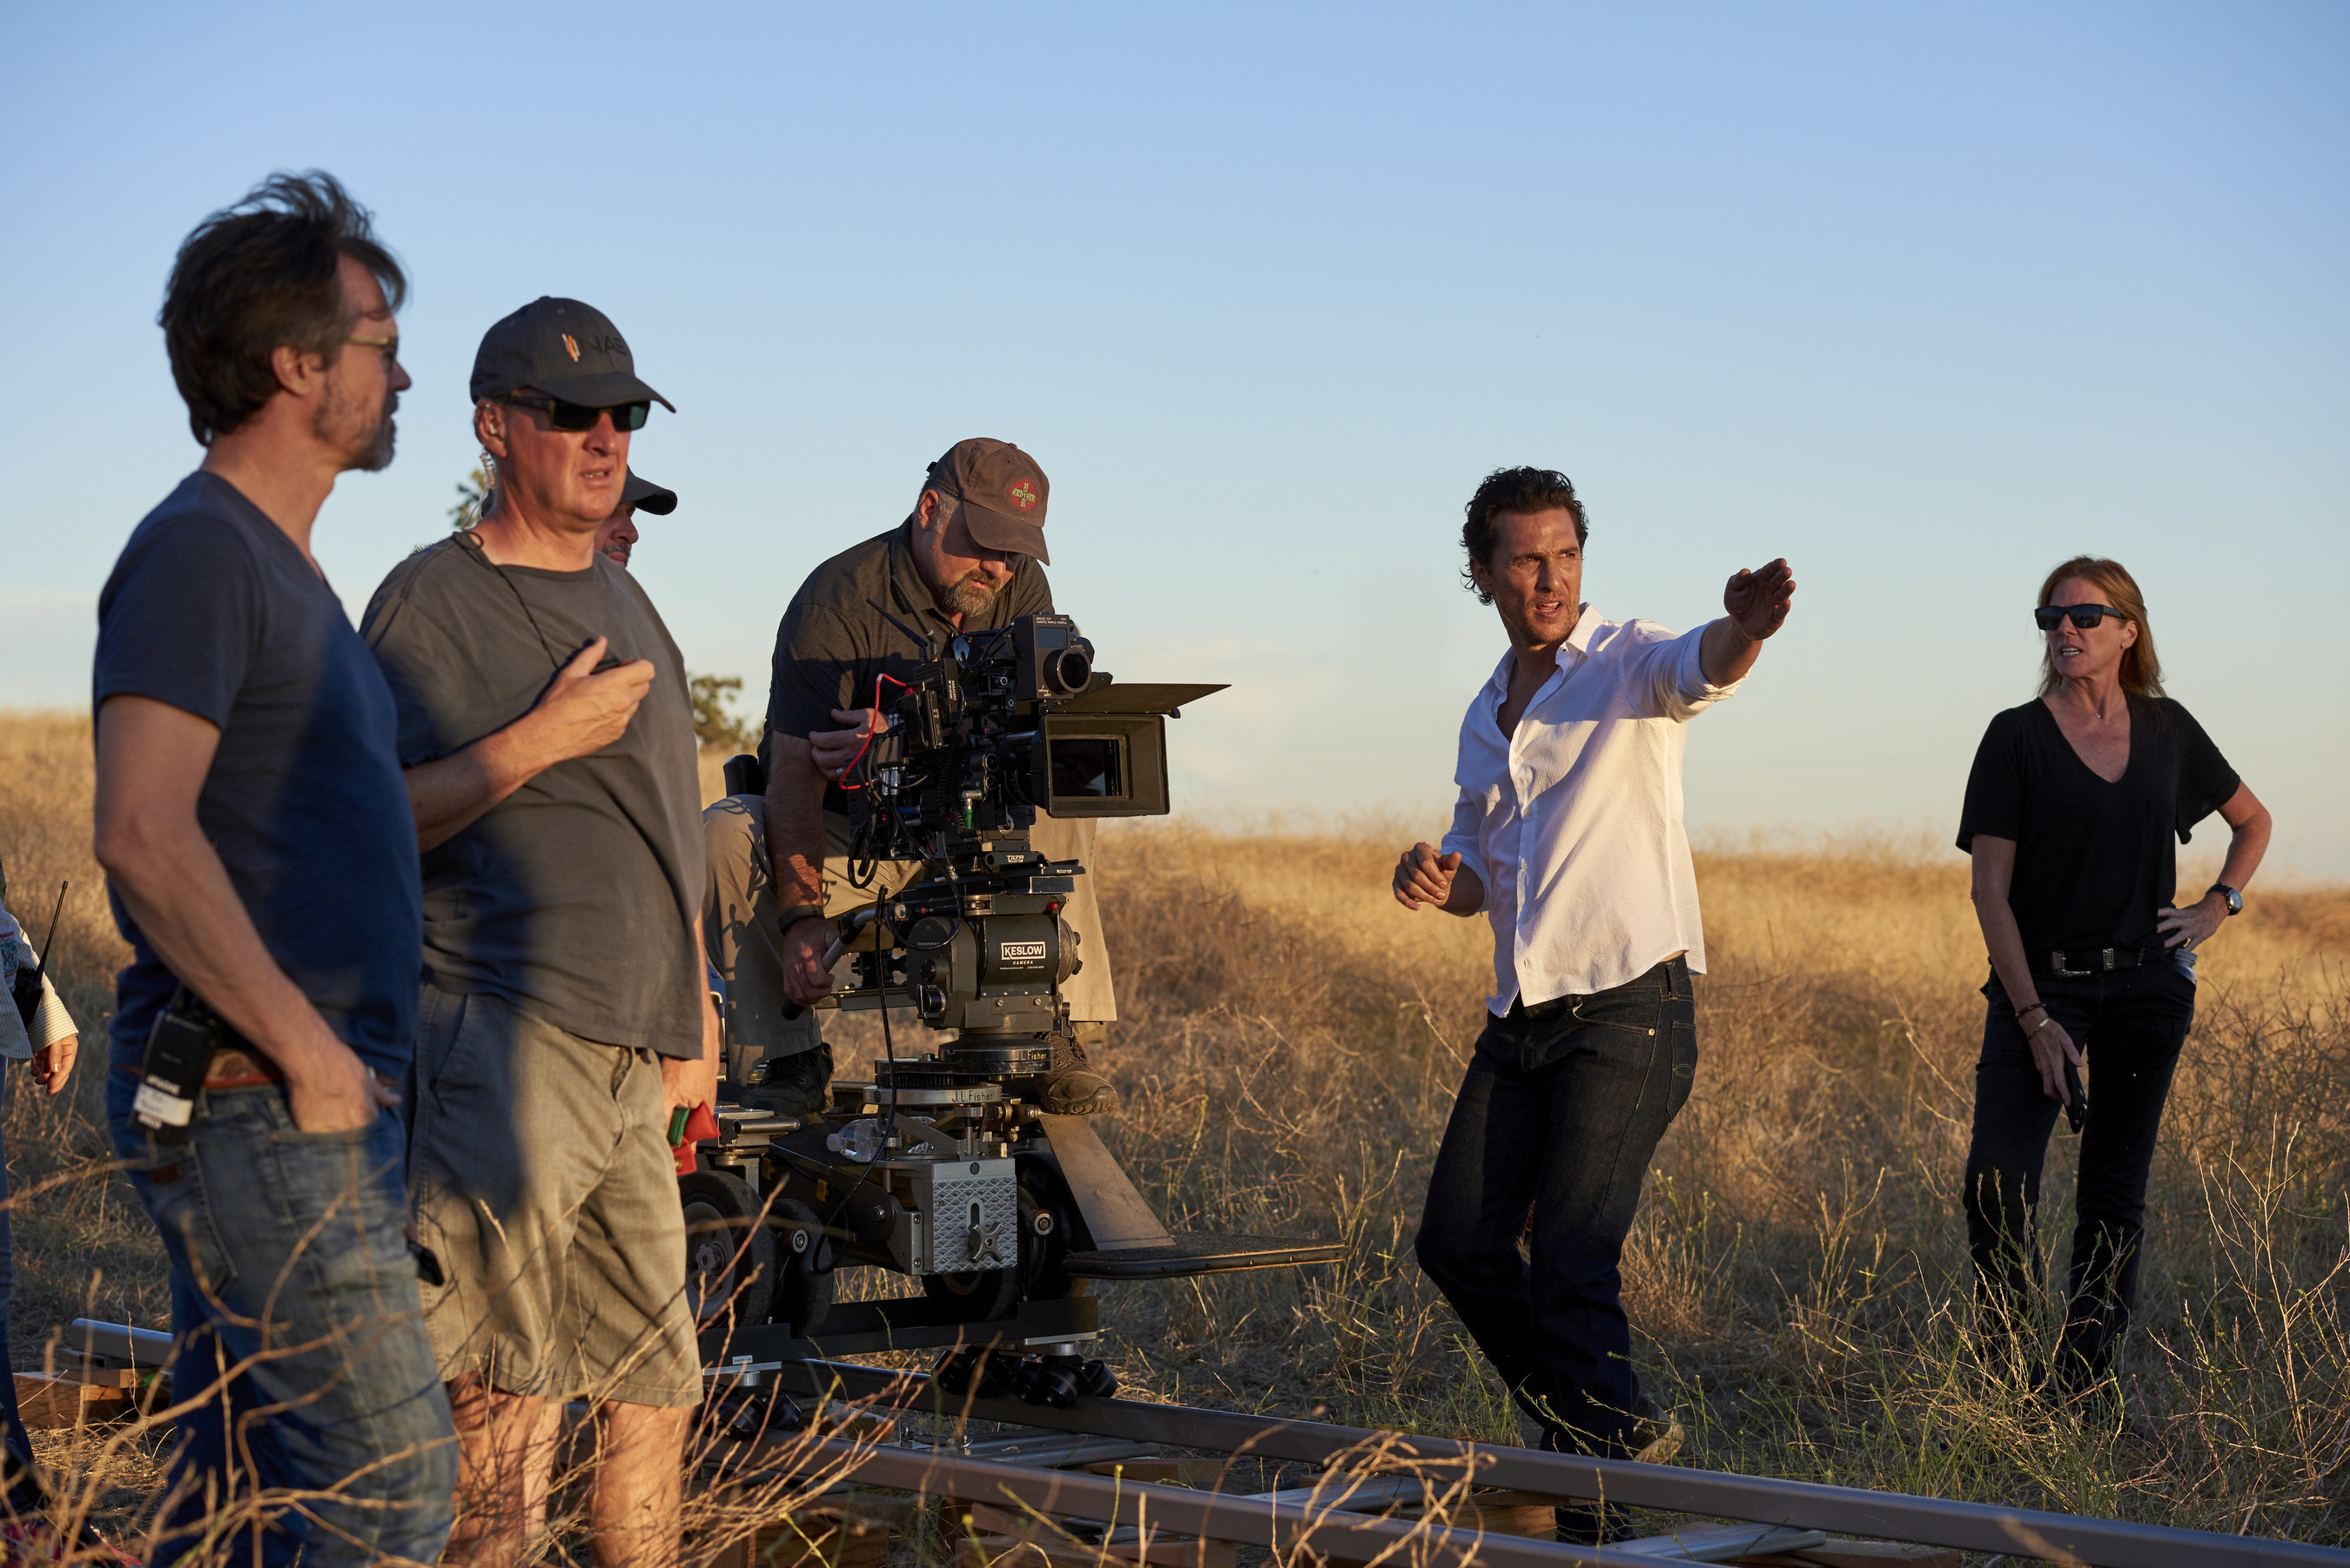 Wild Turkey's Creative Director Matthew McConaughey onsite directing a new television commercial for the bourbon brand. Photo courtesy of Wild Turkey.